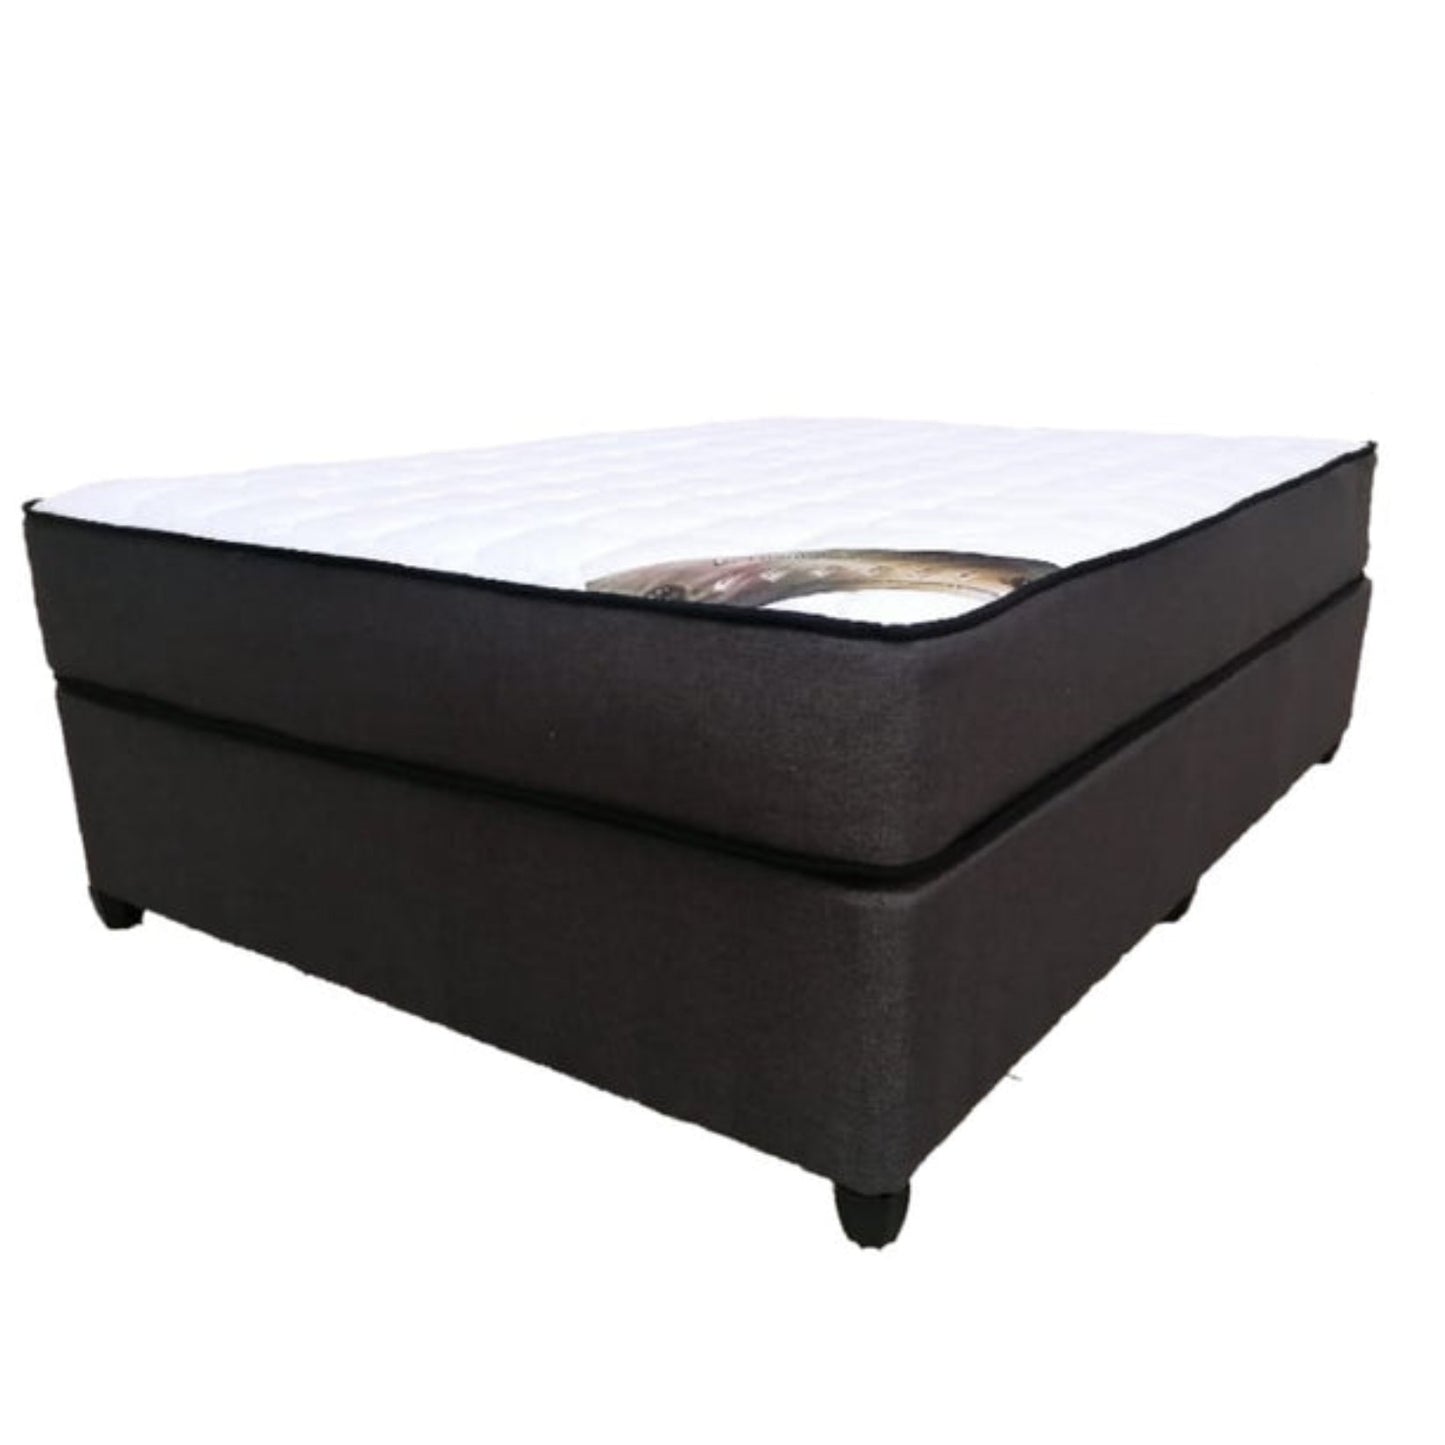 Lumbar Support Bed - That Couch Place